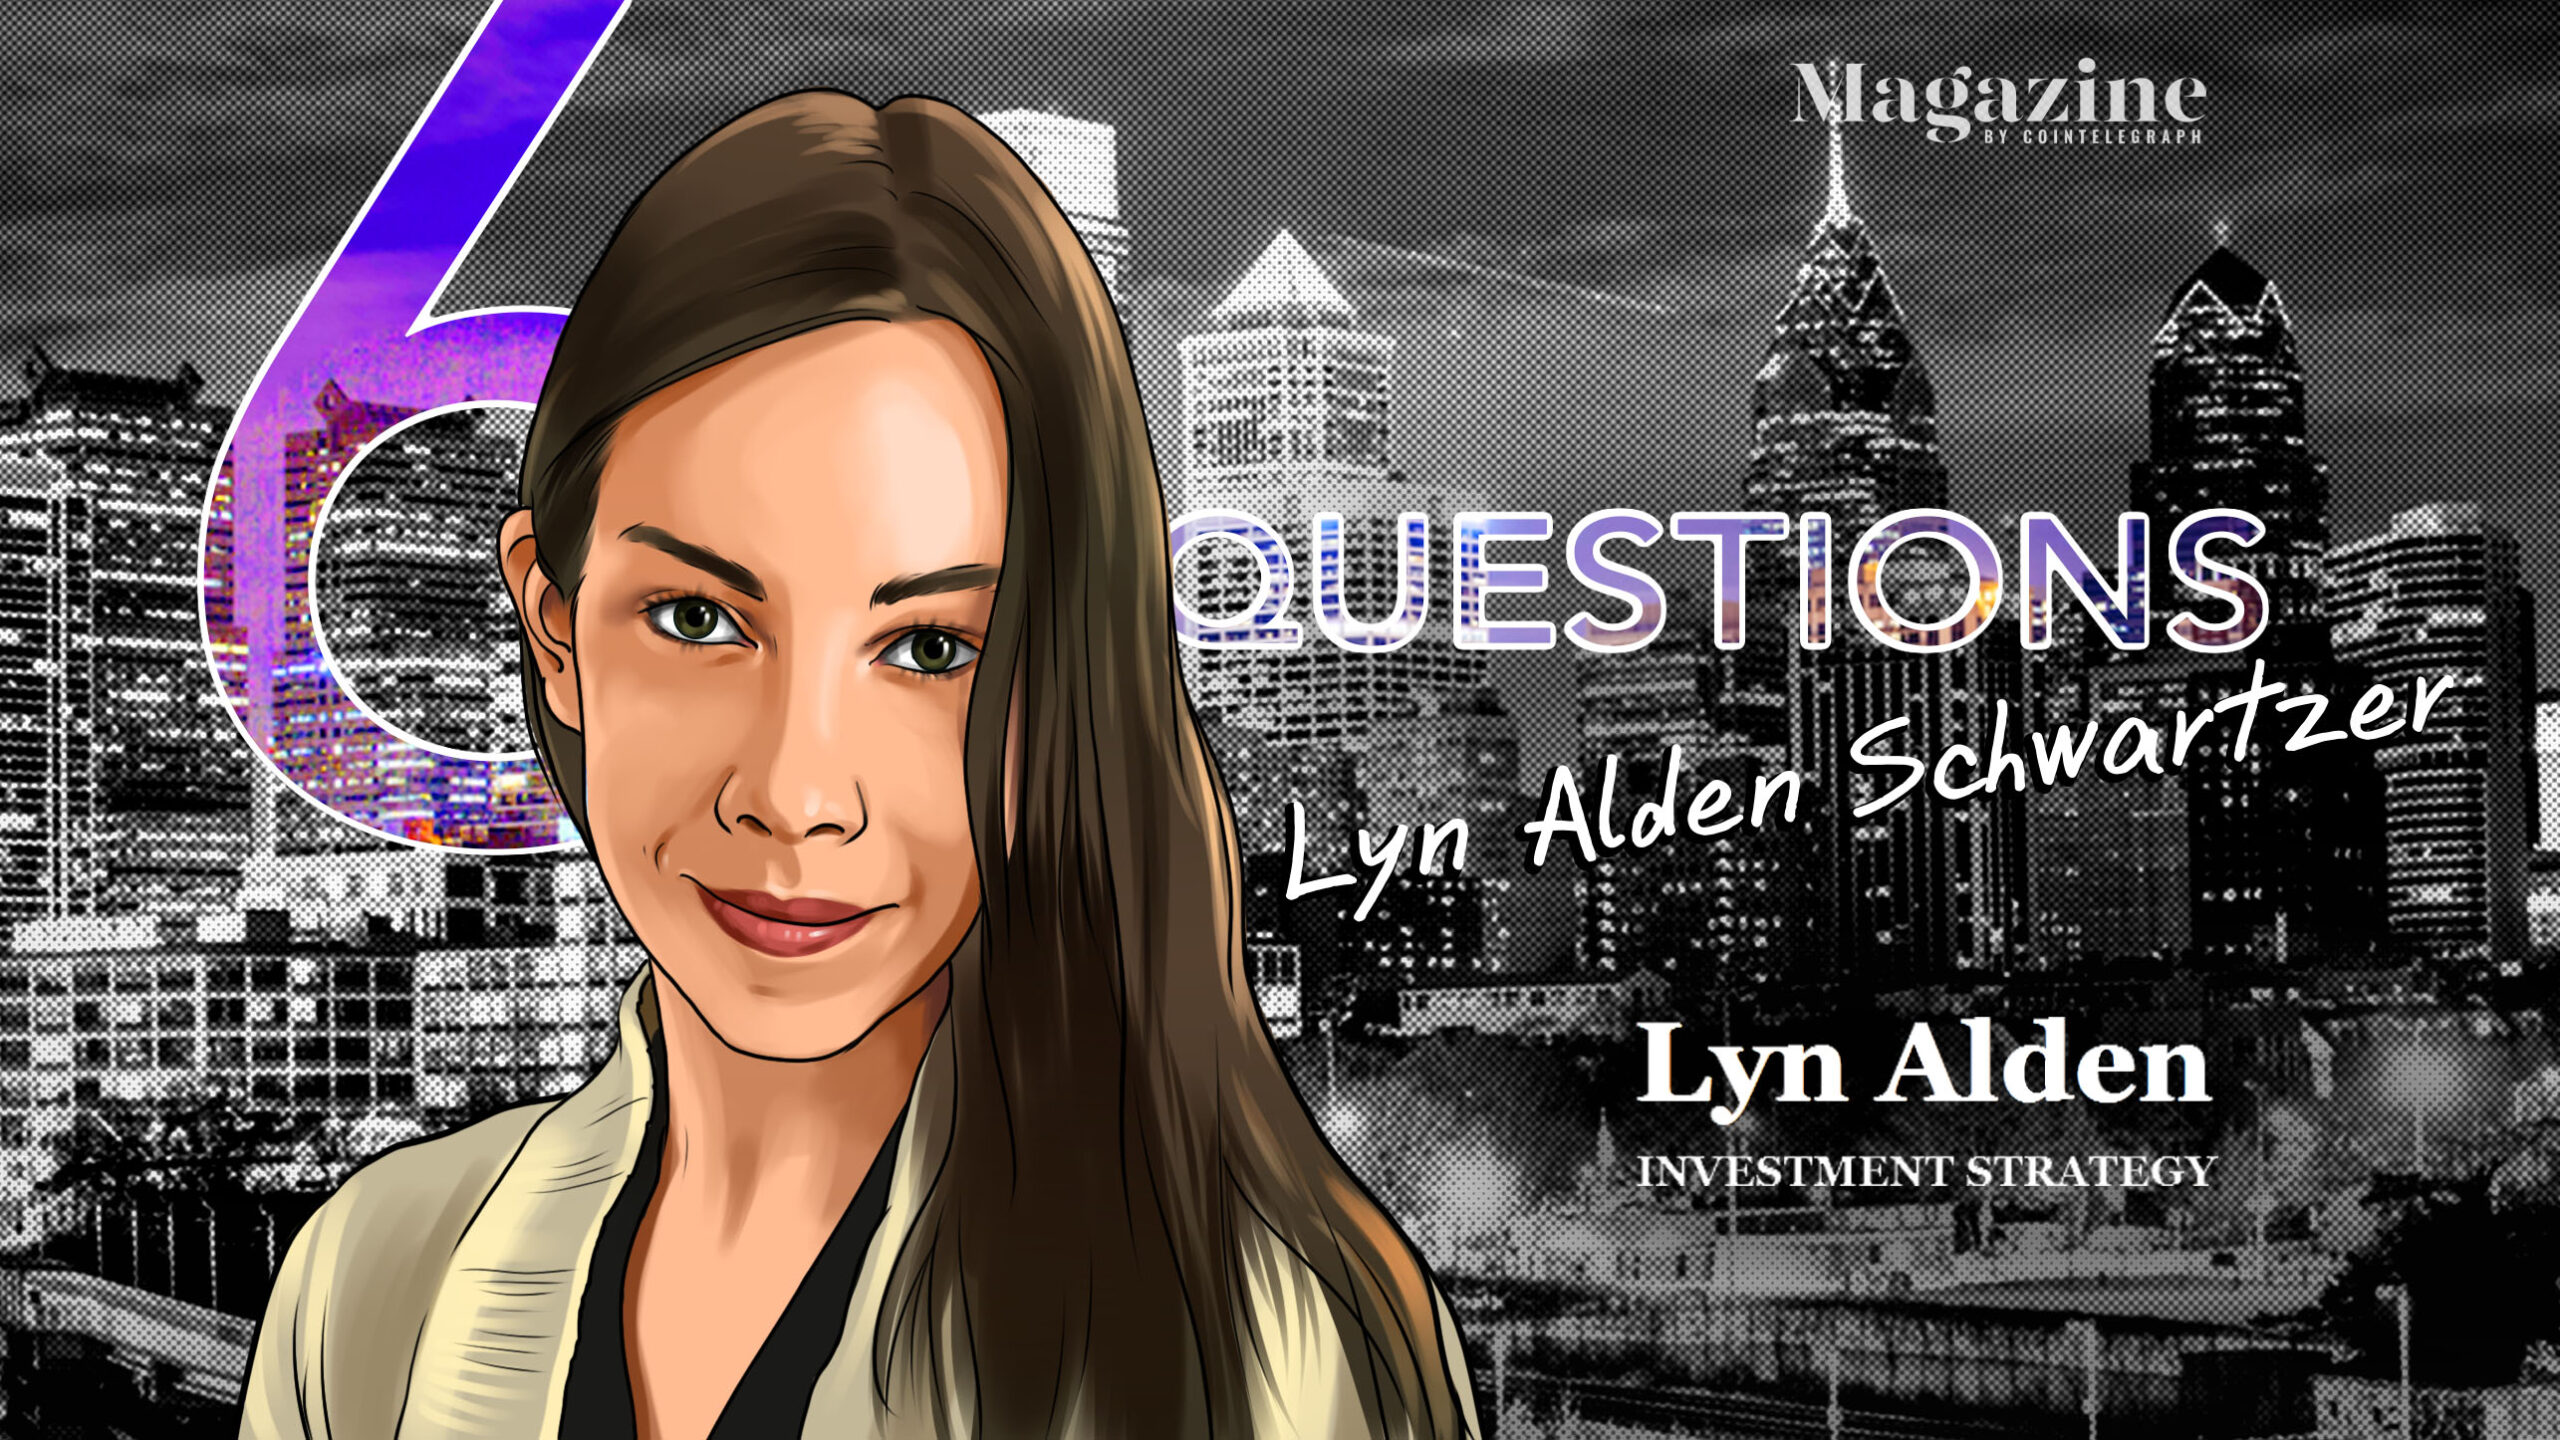 6 Questions for Lyn Alden Schwartzer of Lyn Alden Investment Strategy – Cointelegraph Magazine